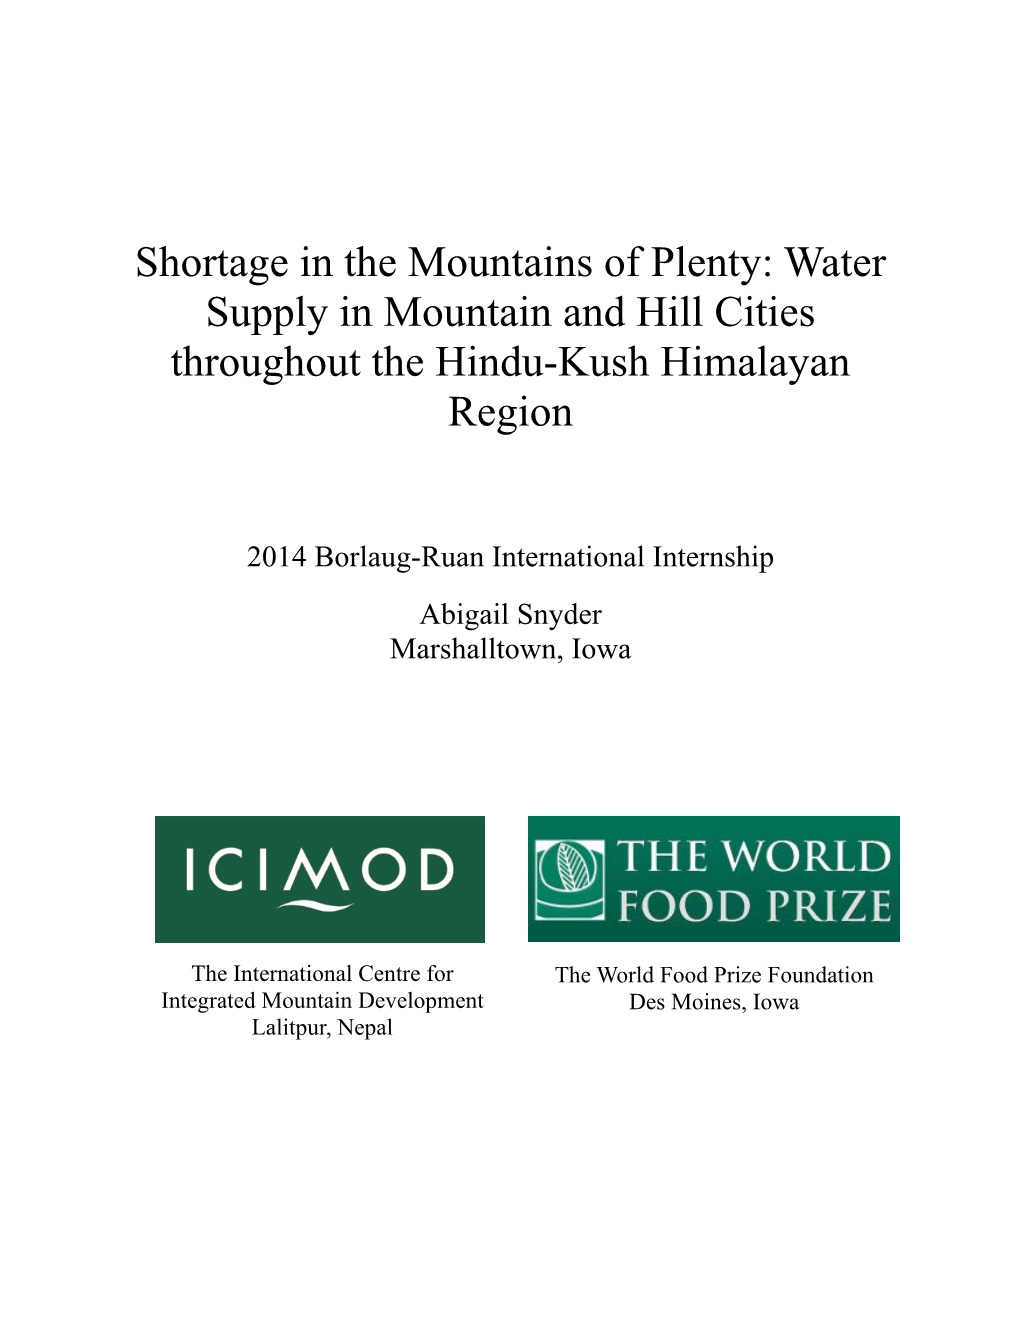 Shortage in the Mountains of Plenty: Water Supply in Mountain and Hill Cities Throughout the Hindu-Kush Himalayan Region